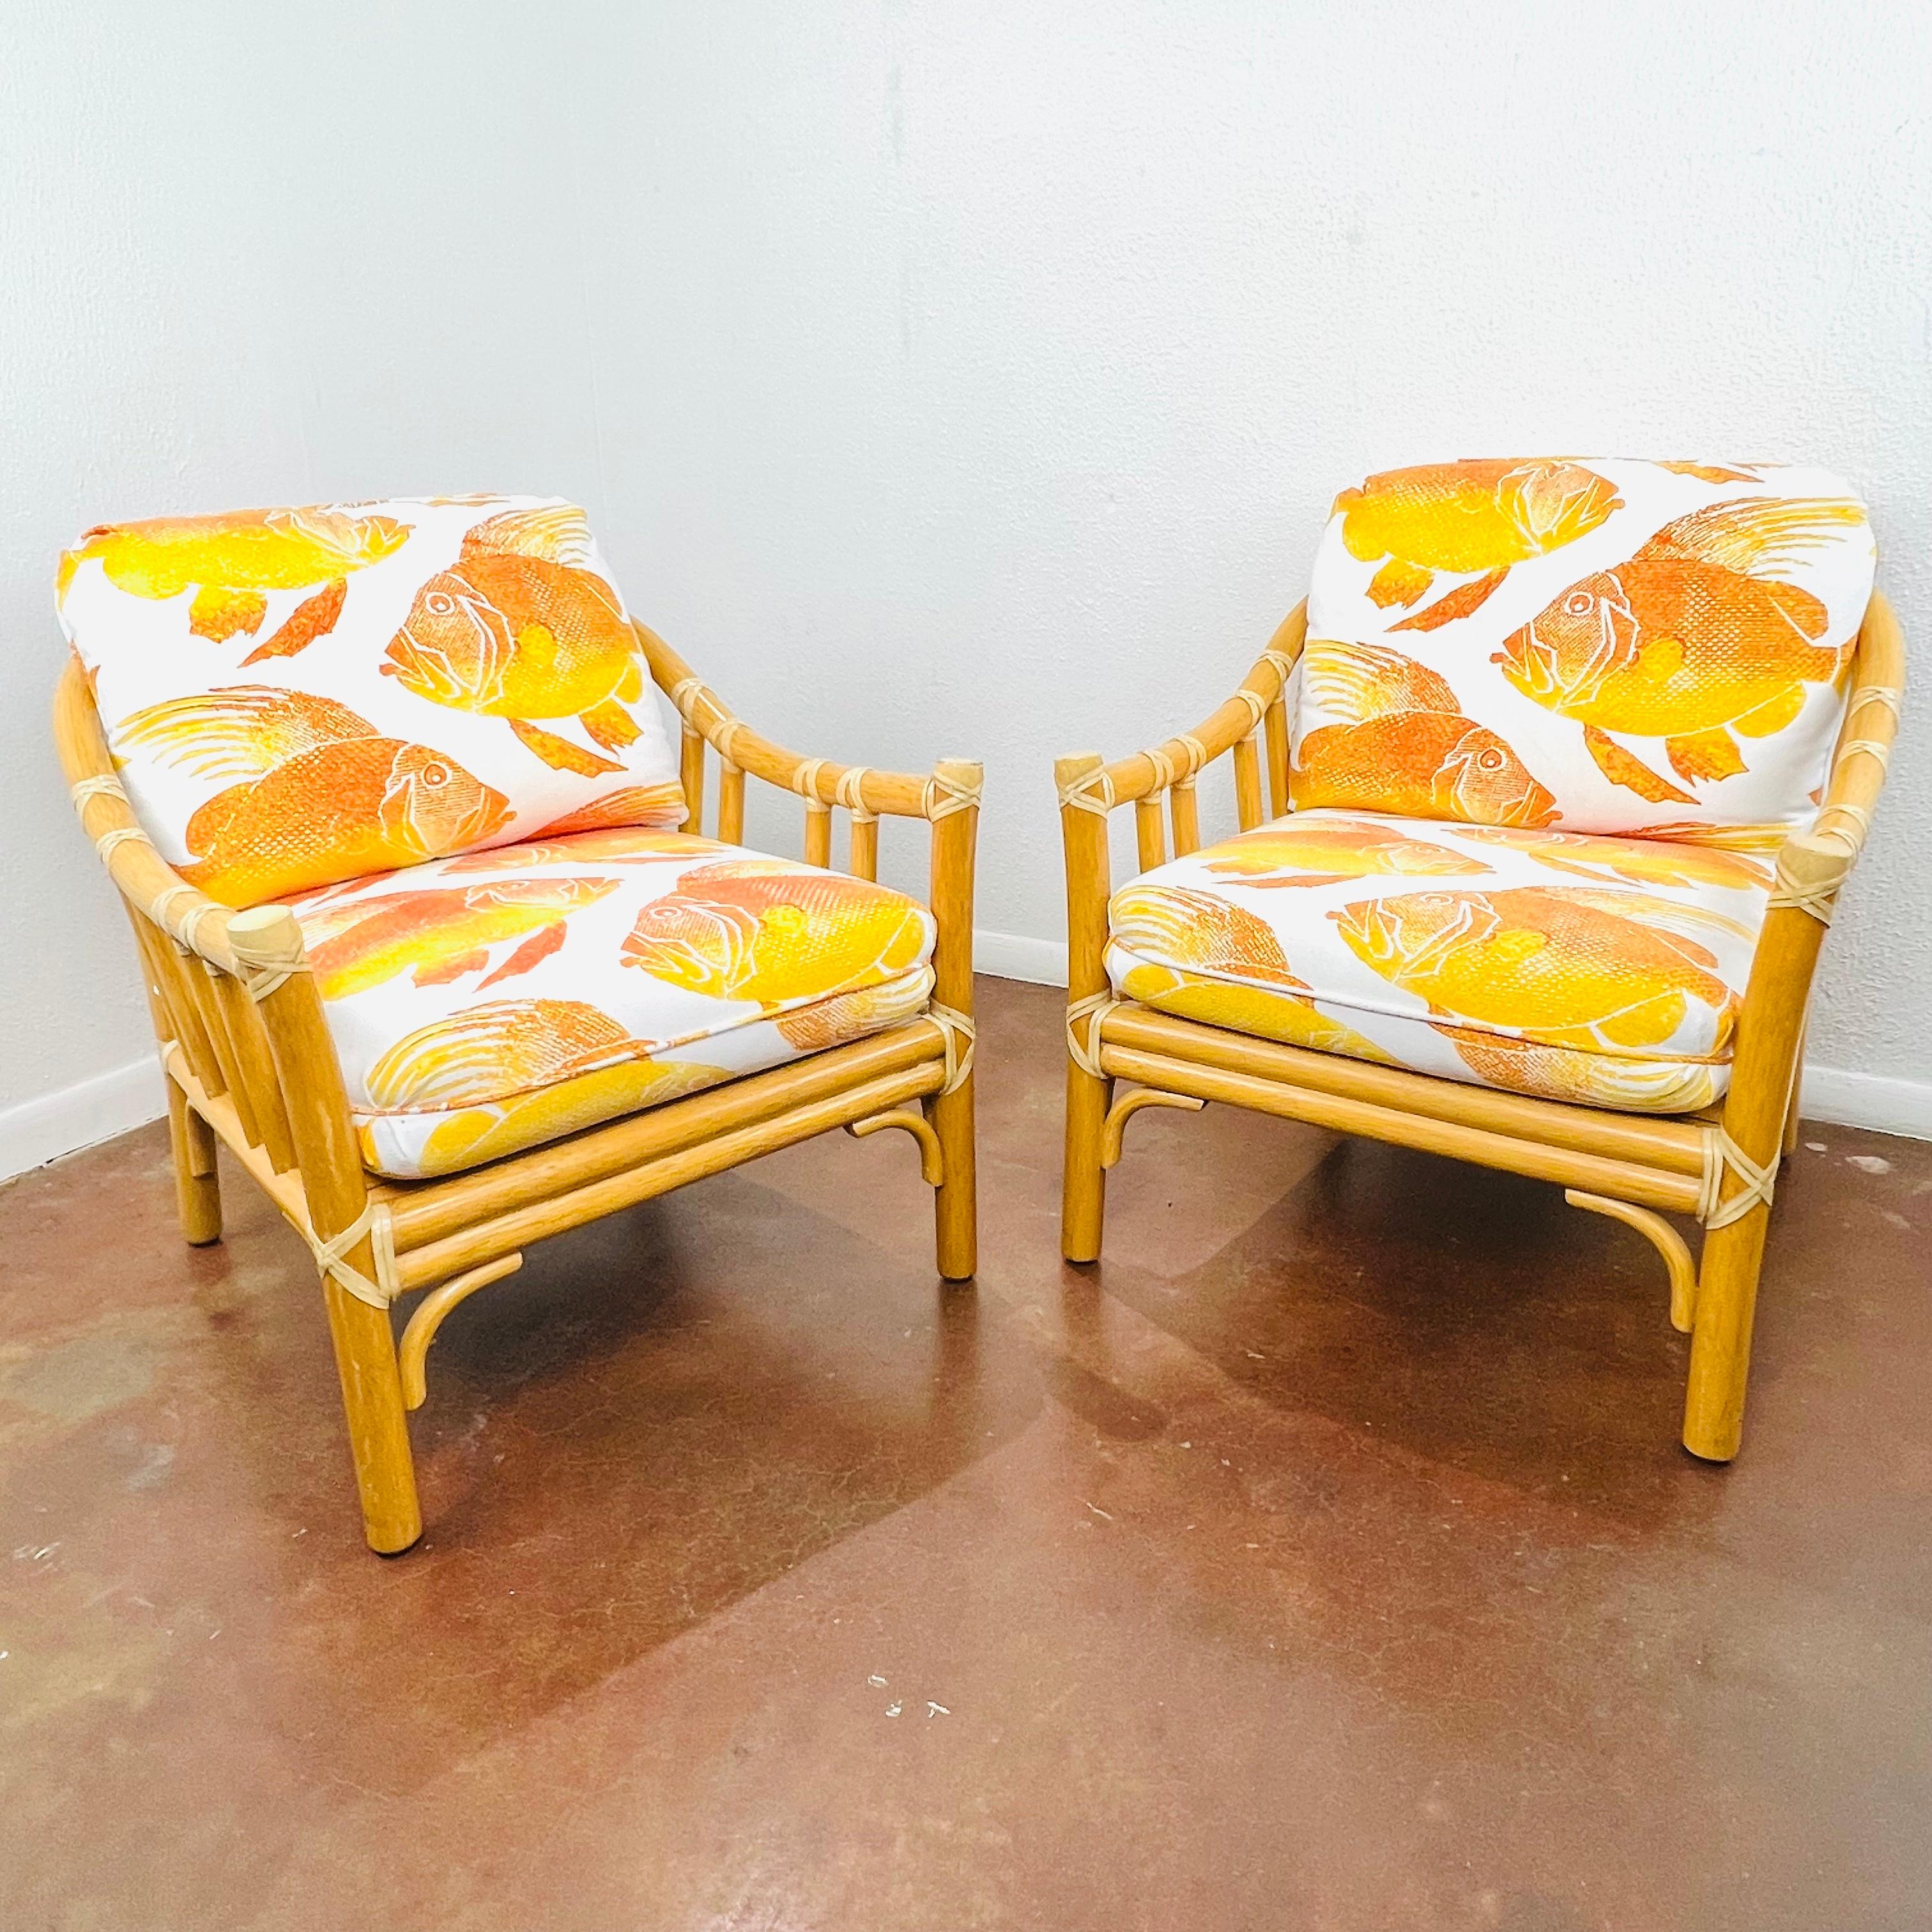 Gorgeous pair of McGuire rattan armchairs with goldfish print upholstery. Excellent condition.